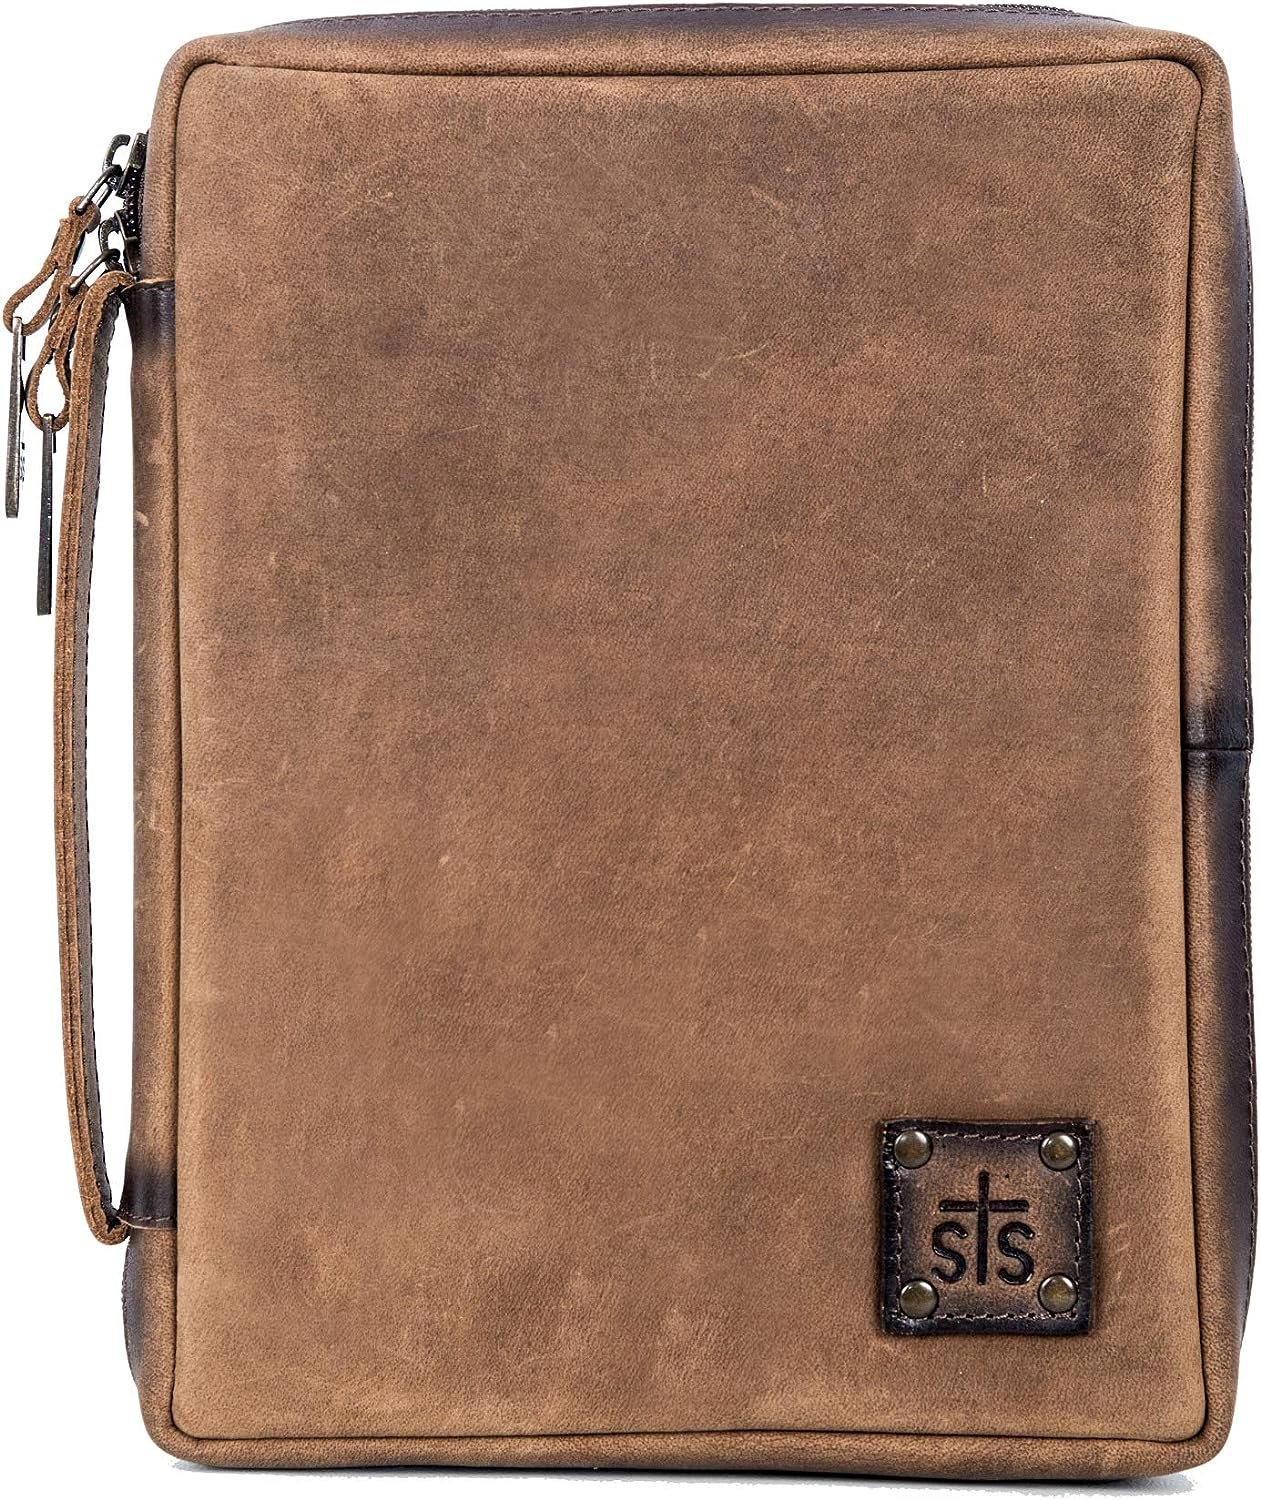 STS Ranchwear STS Tablet/Bible Cover Tornado Brown One Size